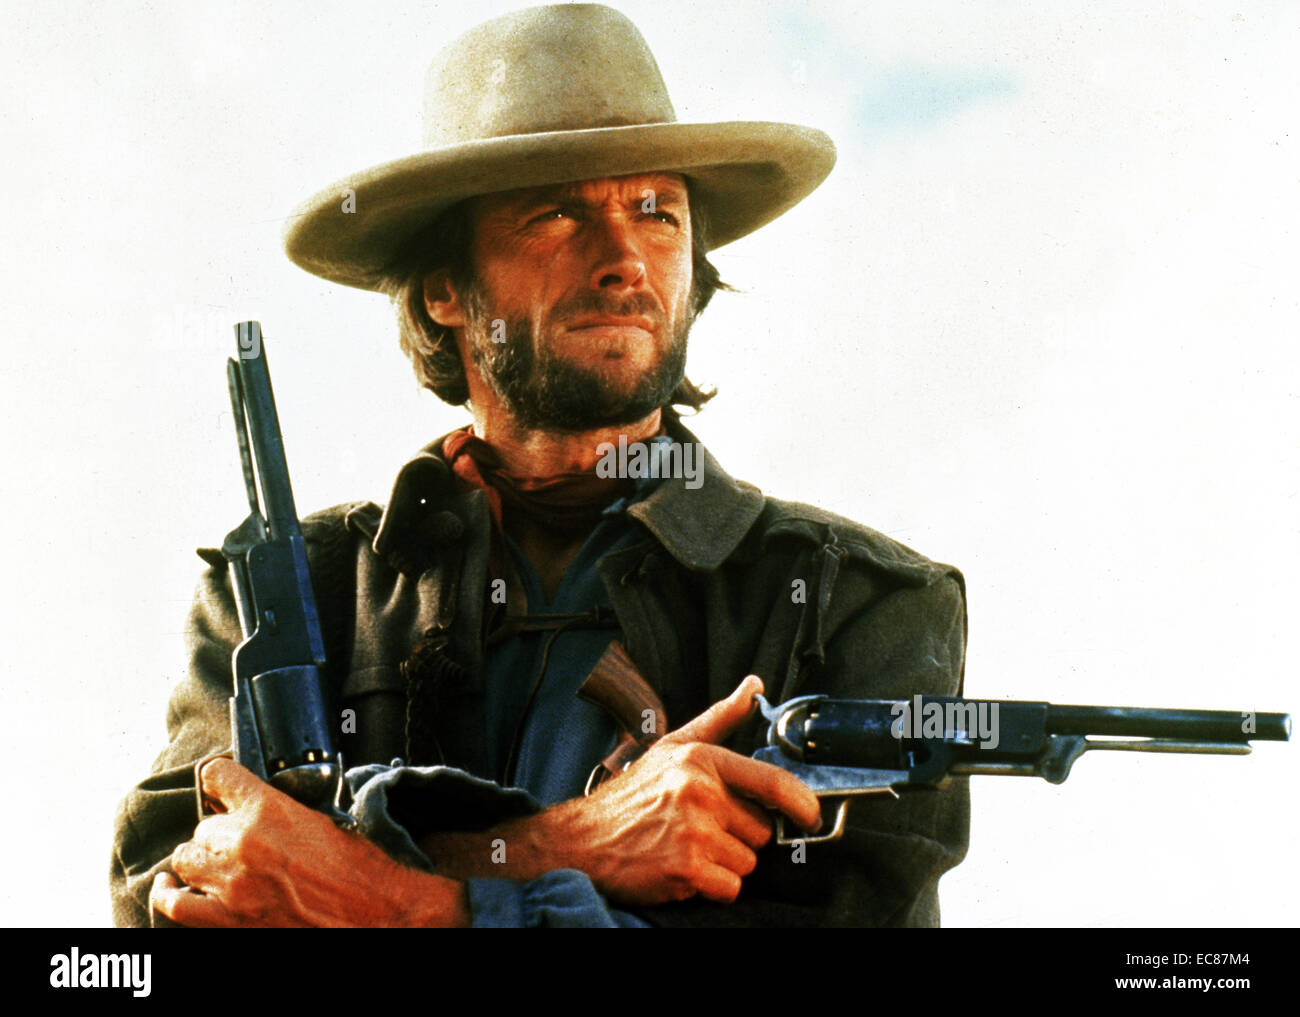 Still from the film 'The Outlaw Josey Wales' a film starring and directed by Clinton 'Clint' Eastwood, Jr (1930-). An American revisionist Western Film set during and after the American Civil War. Dated 1976 Stock Photo